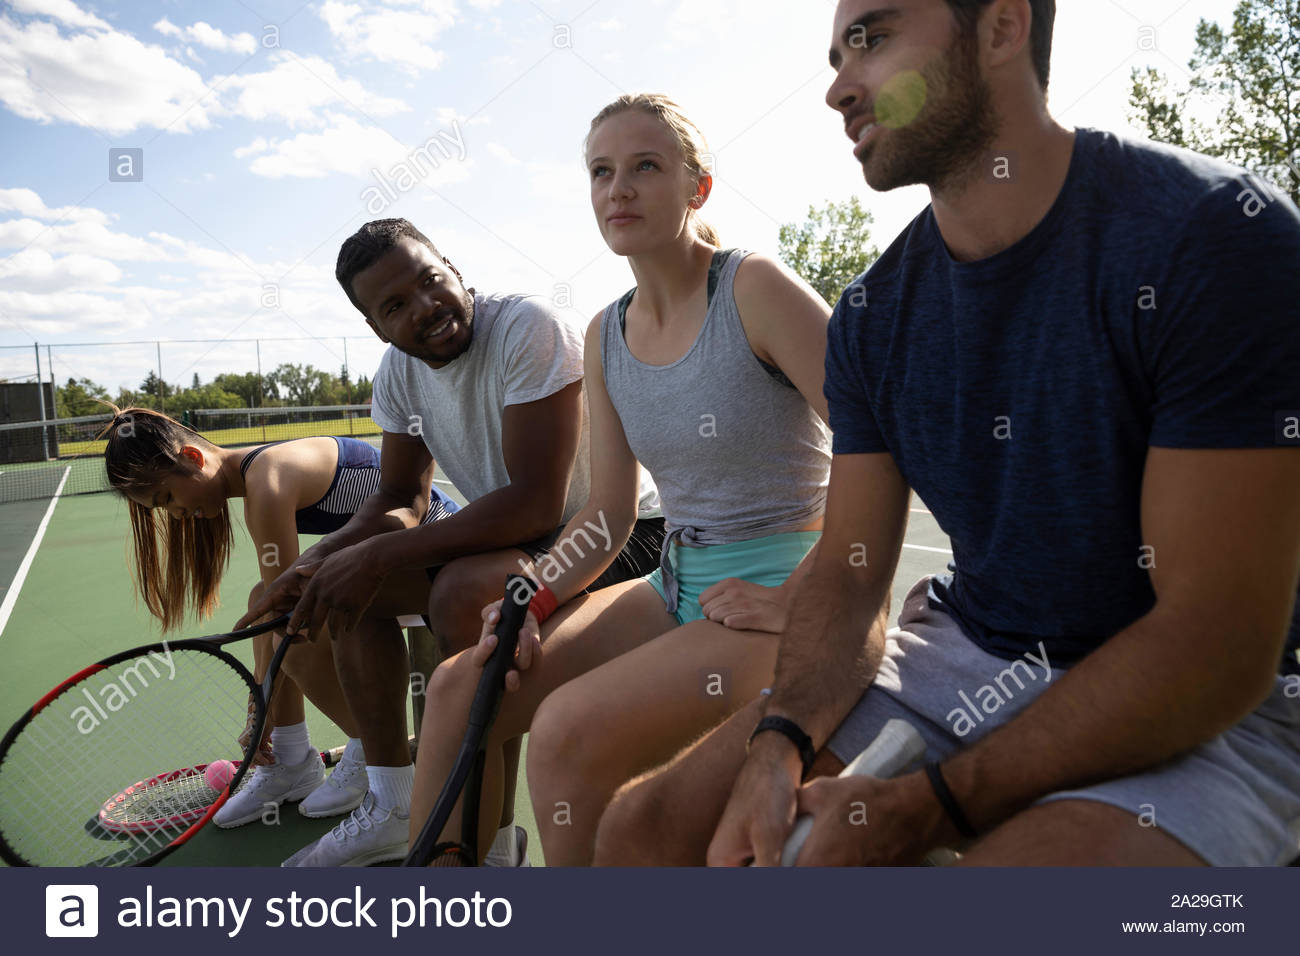 Young couples preparing to play tennis Stock Photo